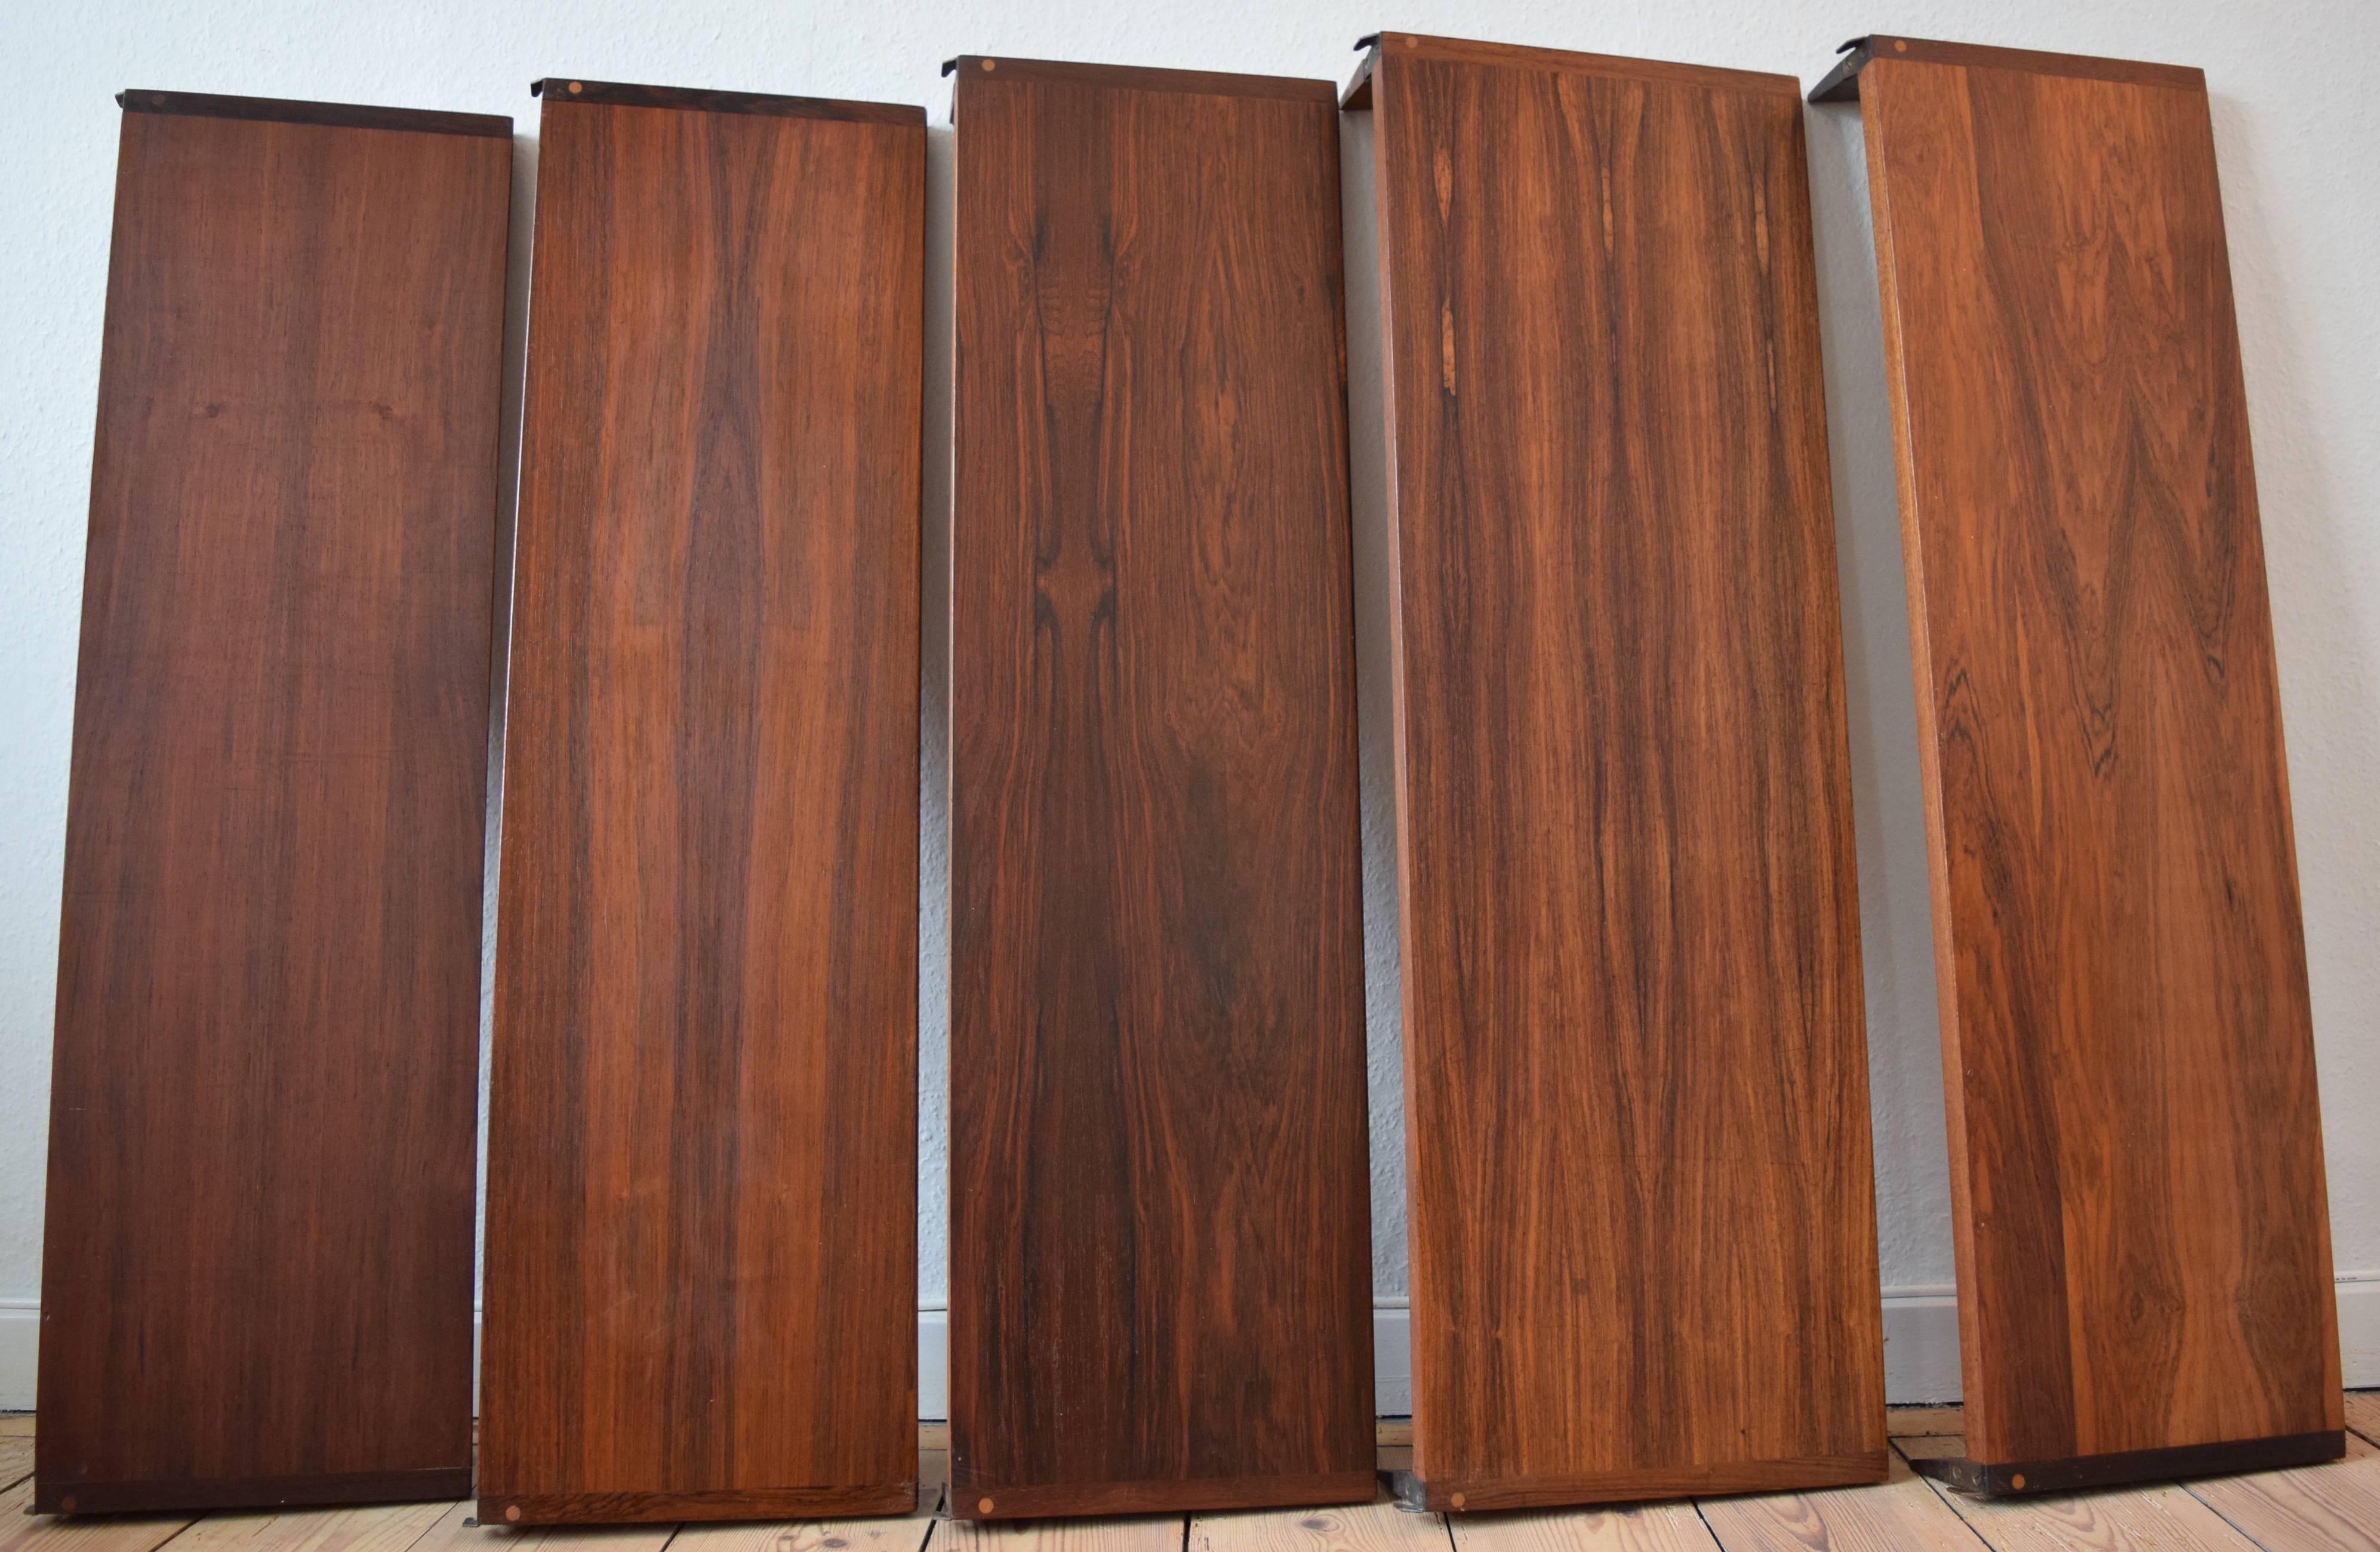 Danish Midcentury Rosewood Shelving System by Kai Kristiansen, 1960s For Sale 3